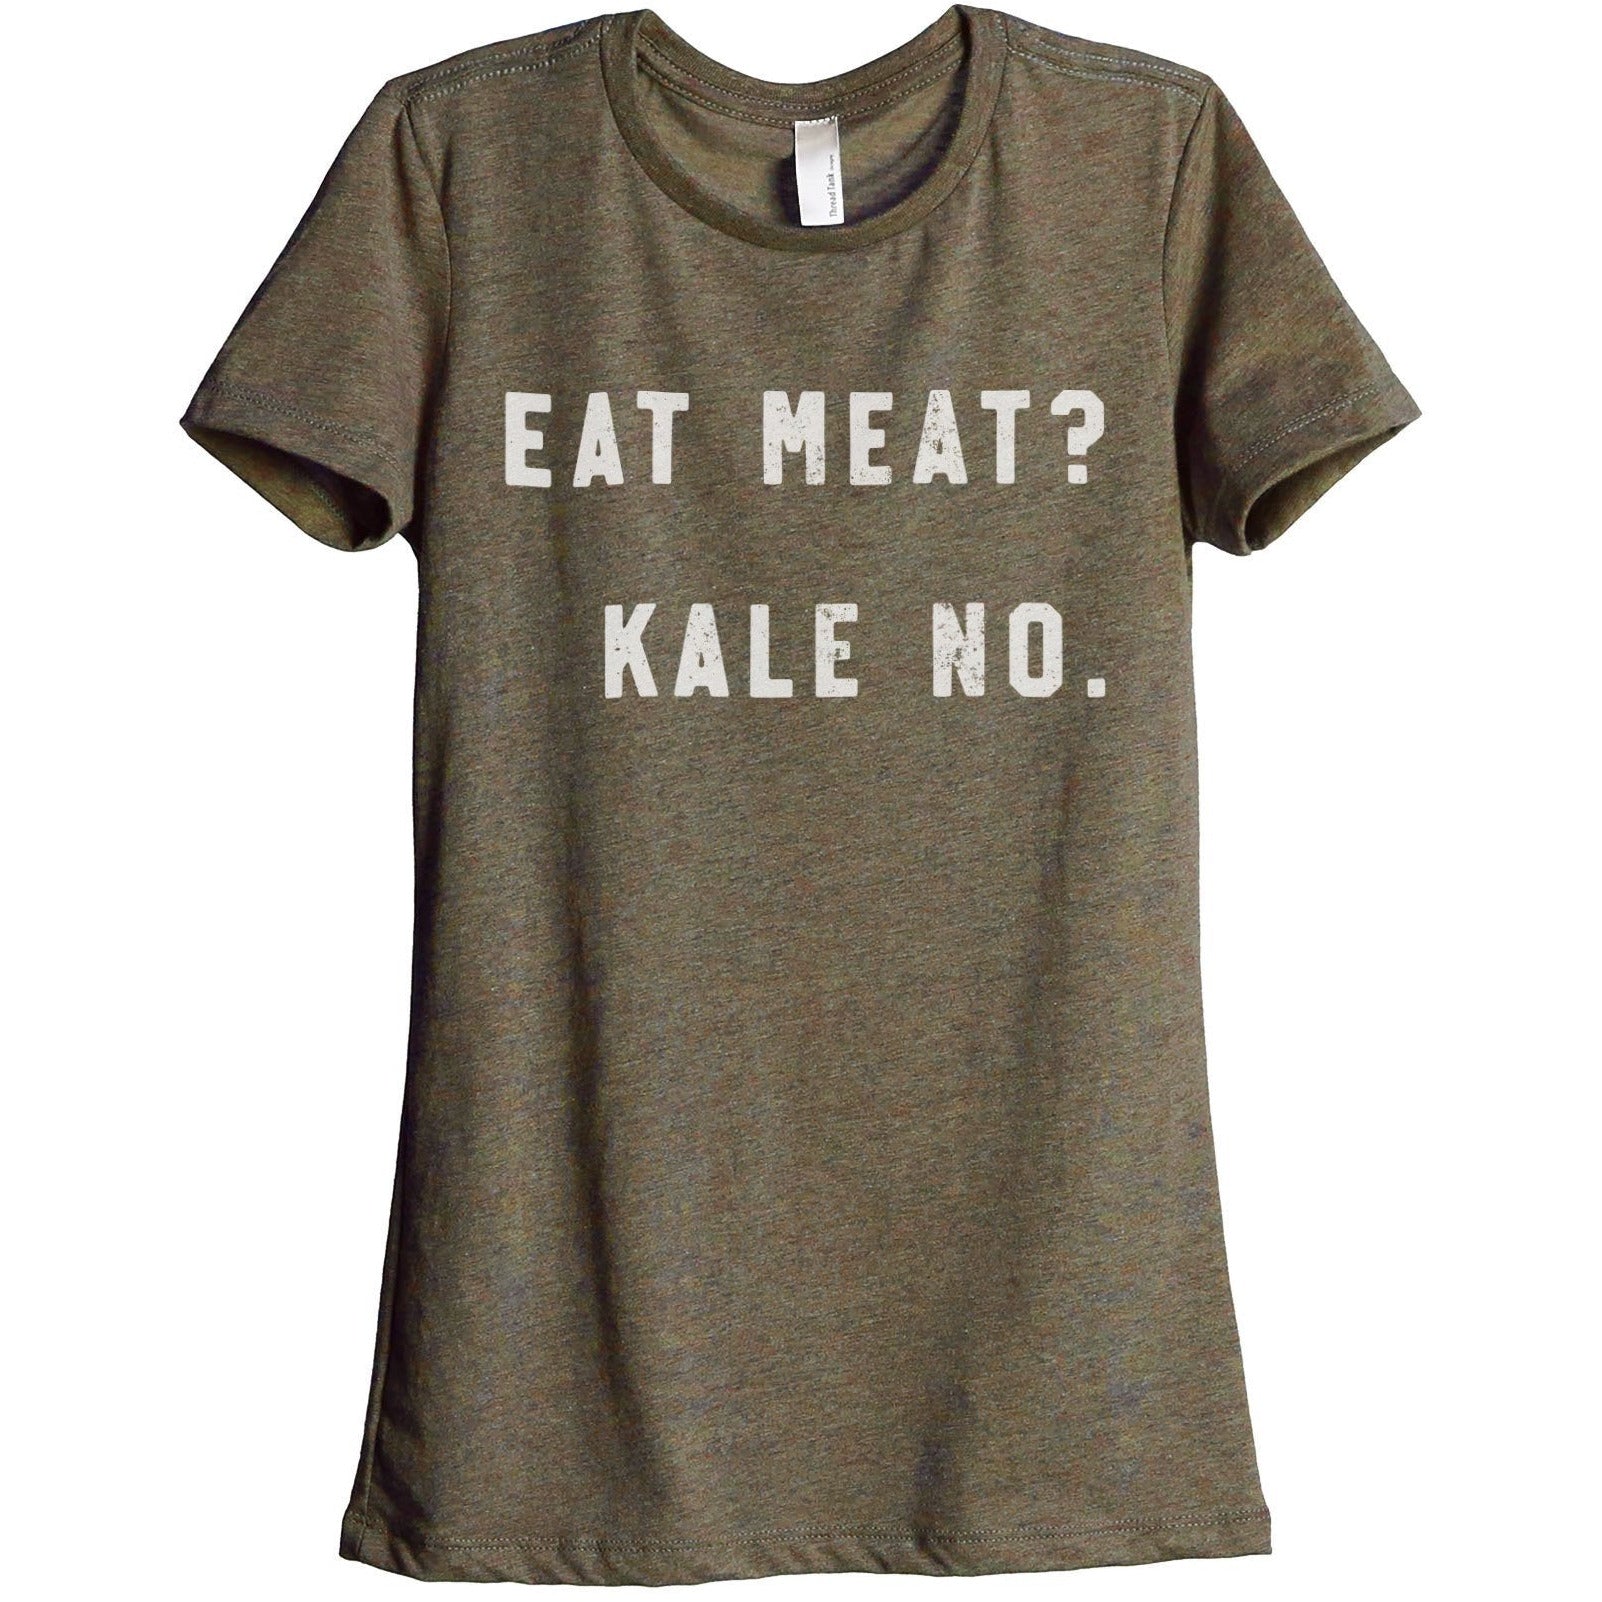 Eat Meat Kale No Women's Relaxed Crewneck T-Shirt Top Tee Heather Sage